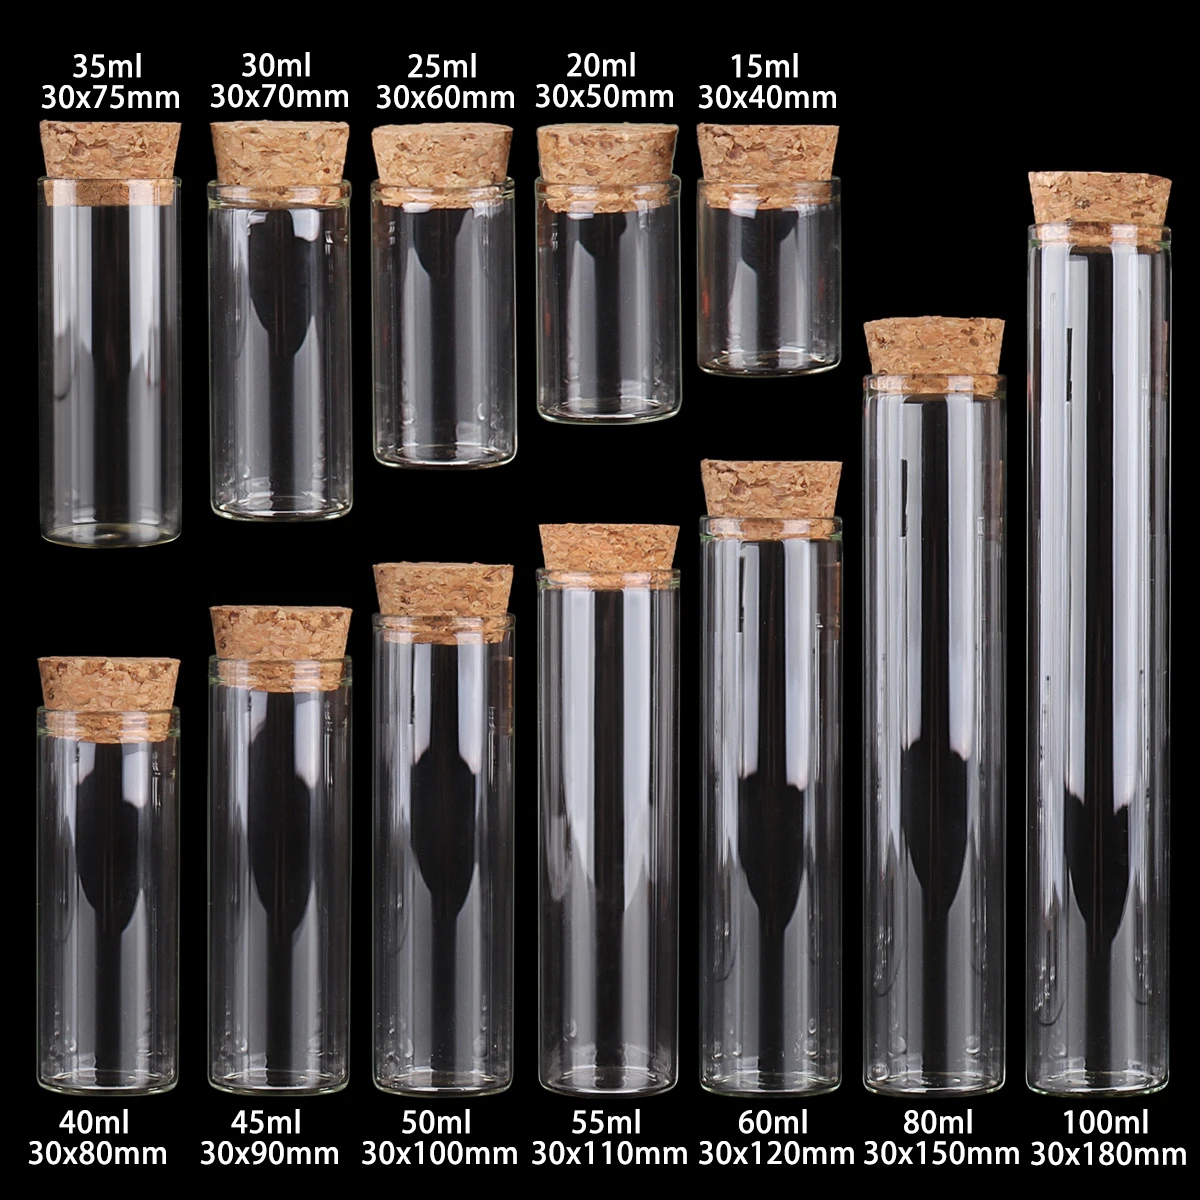 15ml/25ml/30ml/35ml/40ml/45ml/50ml/55ml/60ml/80ml/100ml Small Glass Test Tube with Cork Stopper Bottles Jars Vials 24 pieces